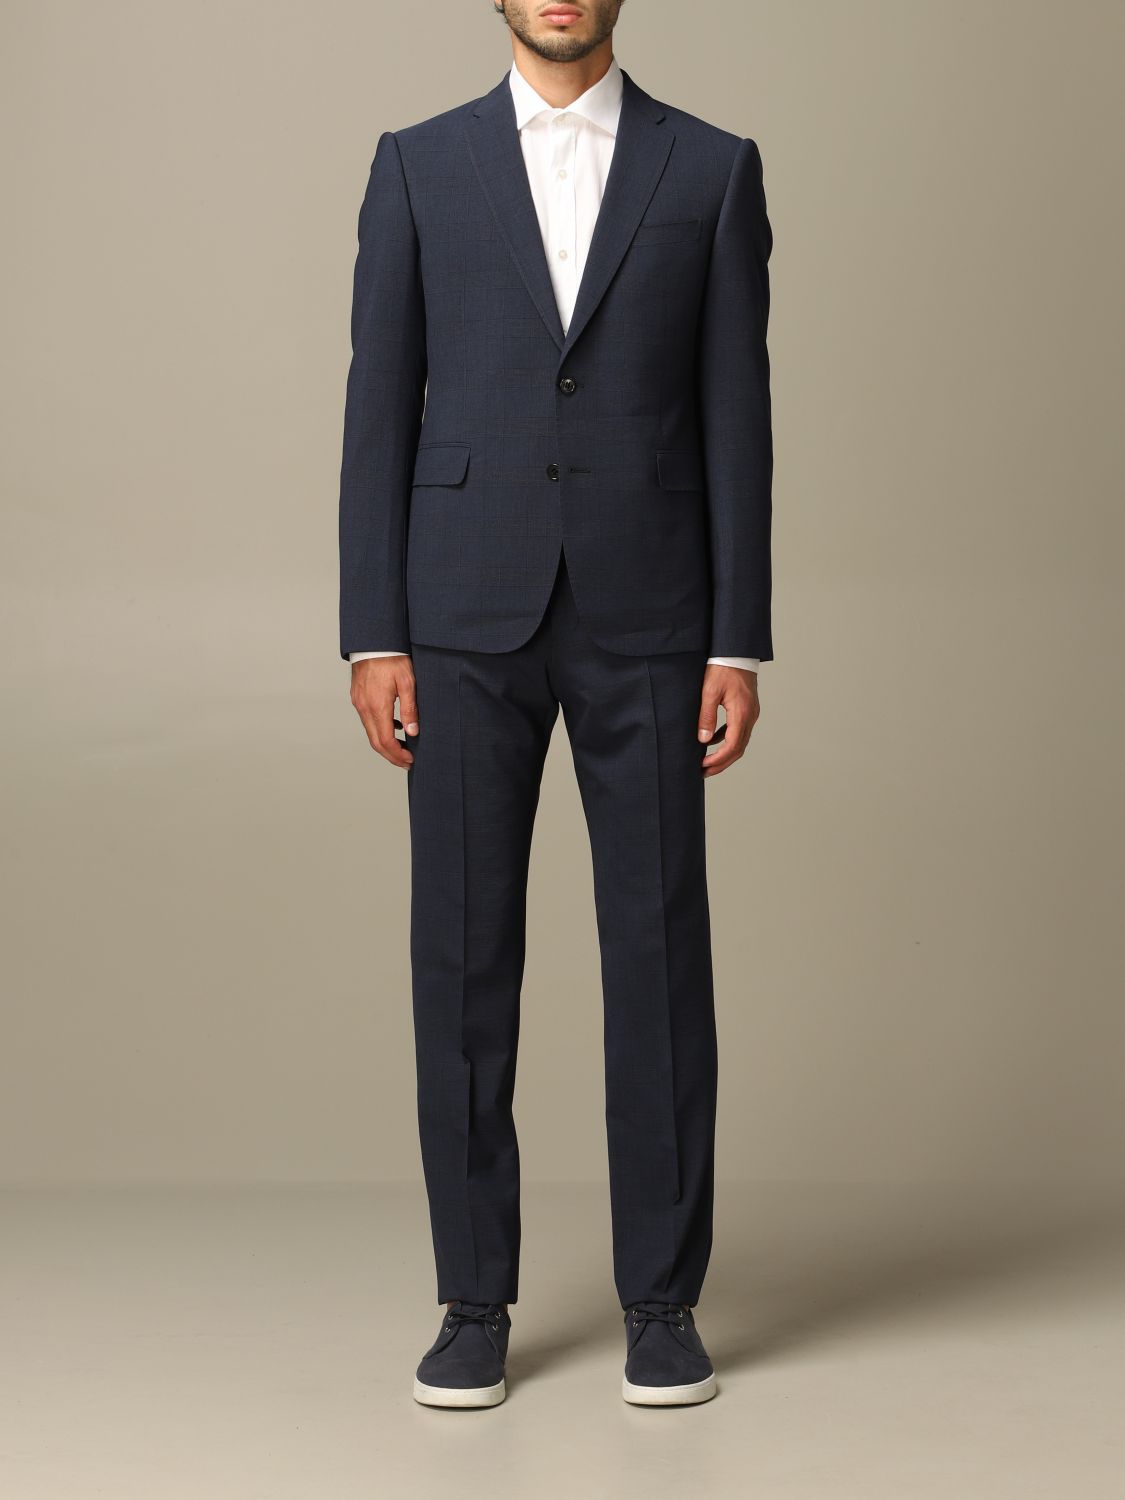 Emporio Armani Outlet: single-breasted suit - Blue | Emporio Armani suit  51VMML 51569 online on 